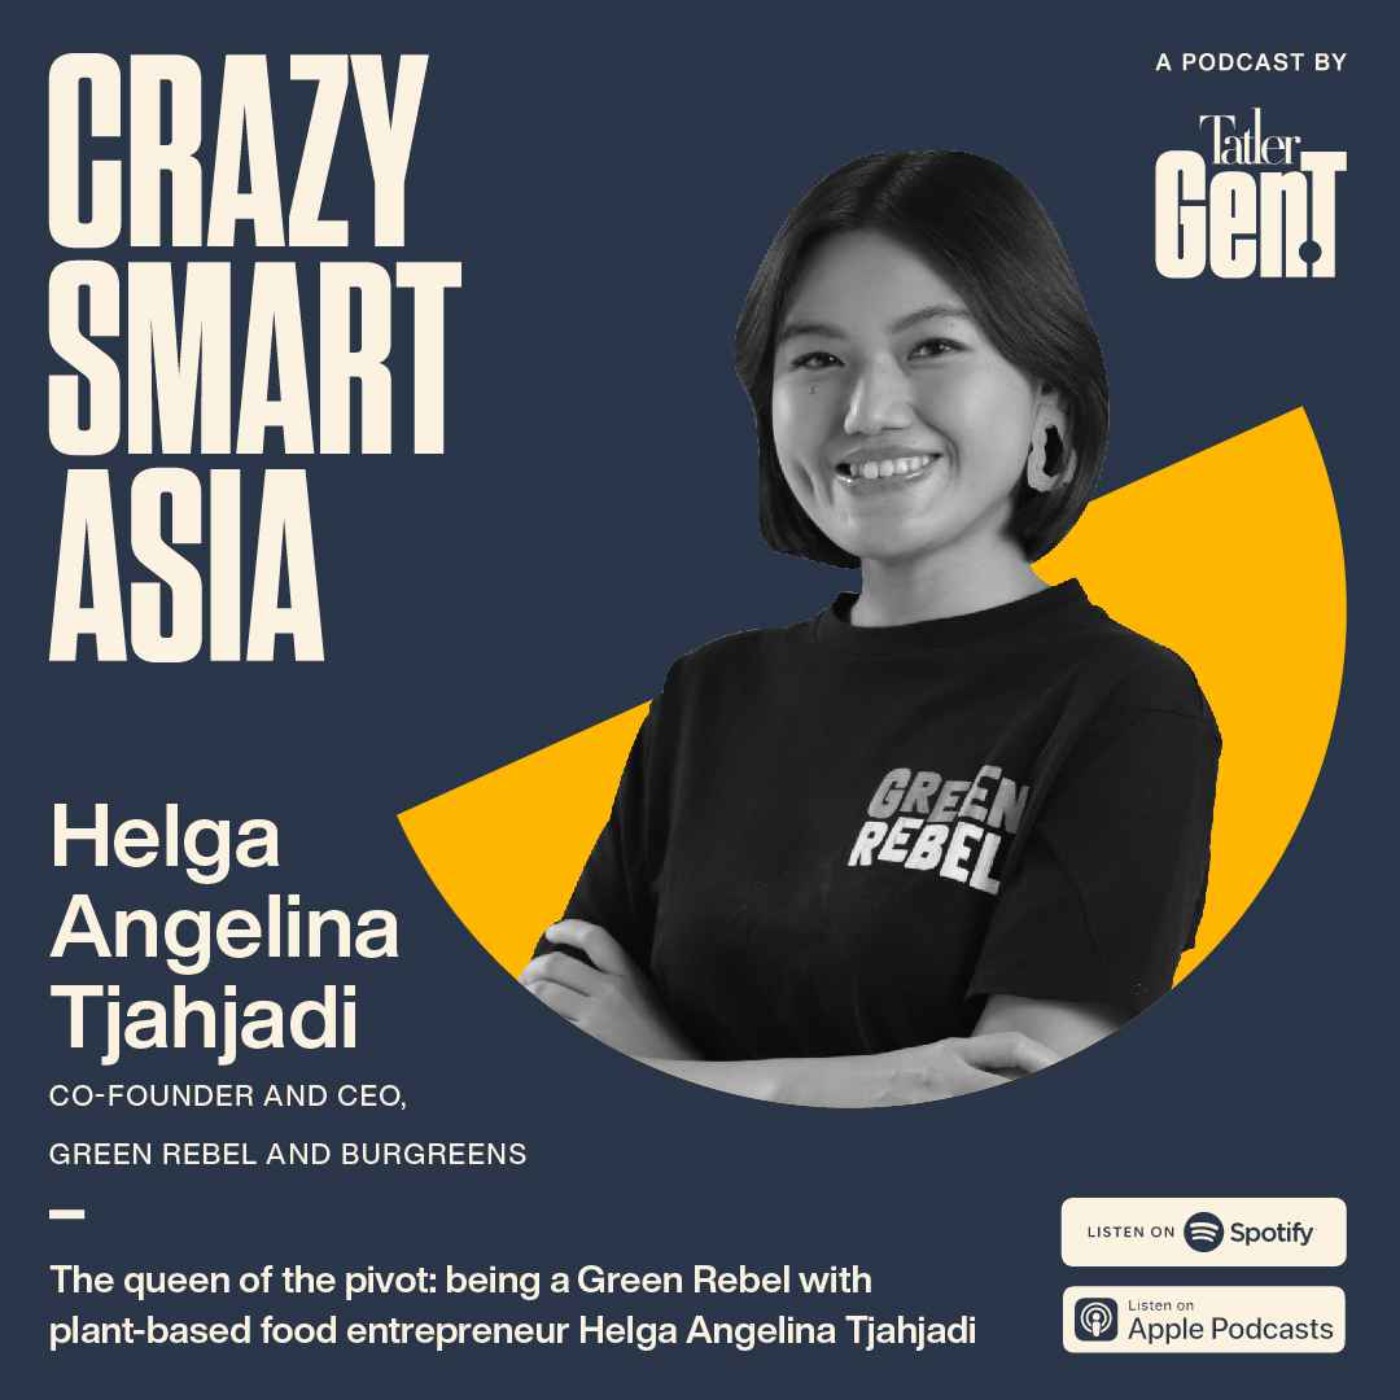 The queen of the pivot: being a Green Rebel with plant-based food entrepreneur Helga Angelina Tjahjadi